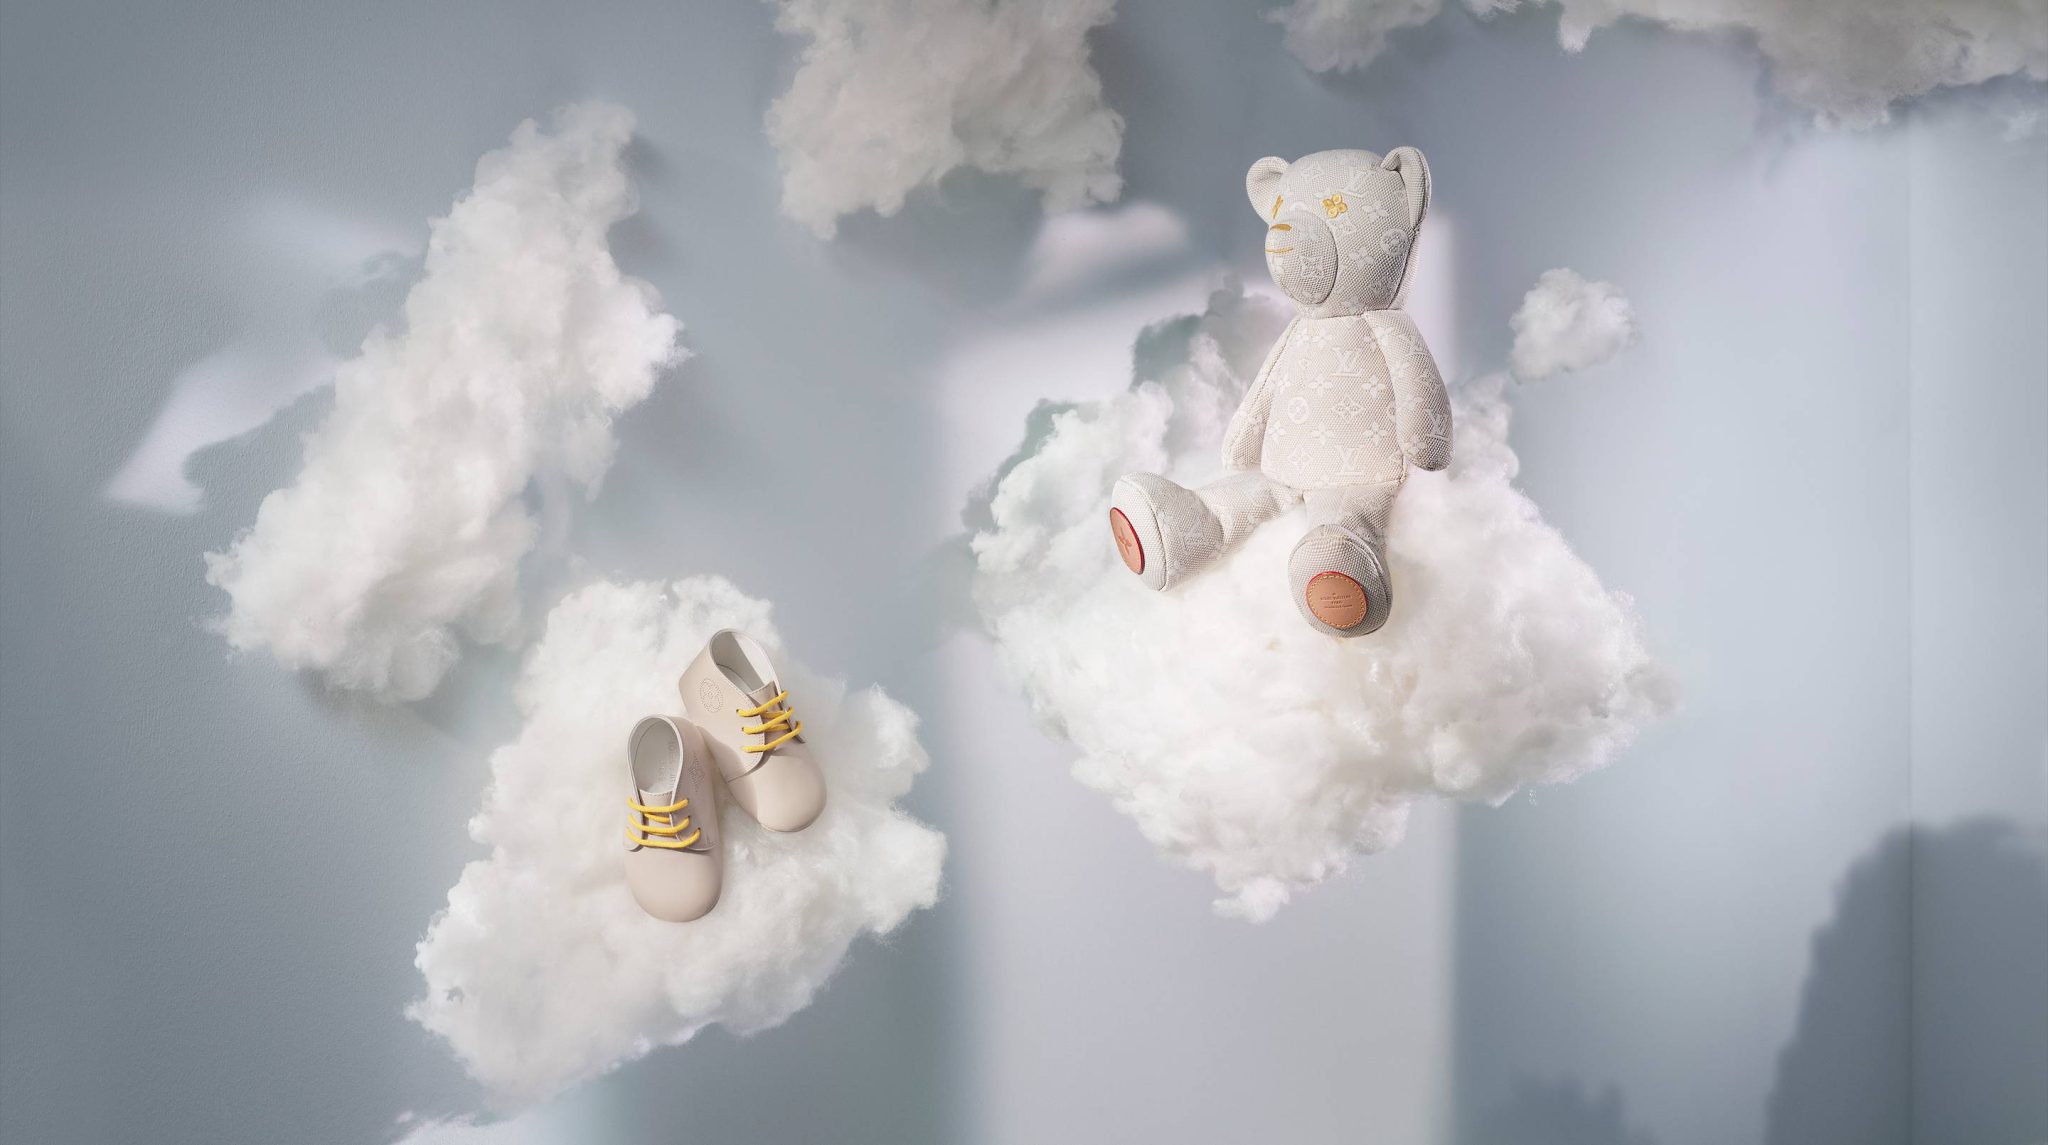 LOUIS VUITTON PRESENTS ITS FIRST BABY COLLECTION - Numéro Netherlands